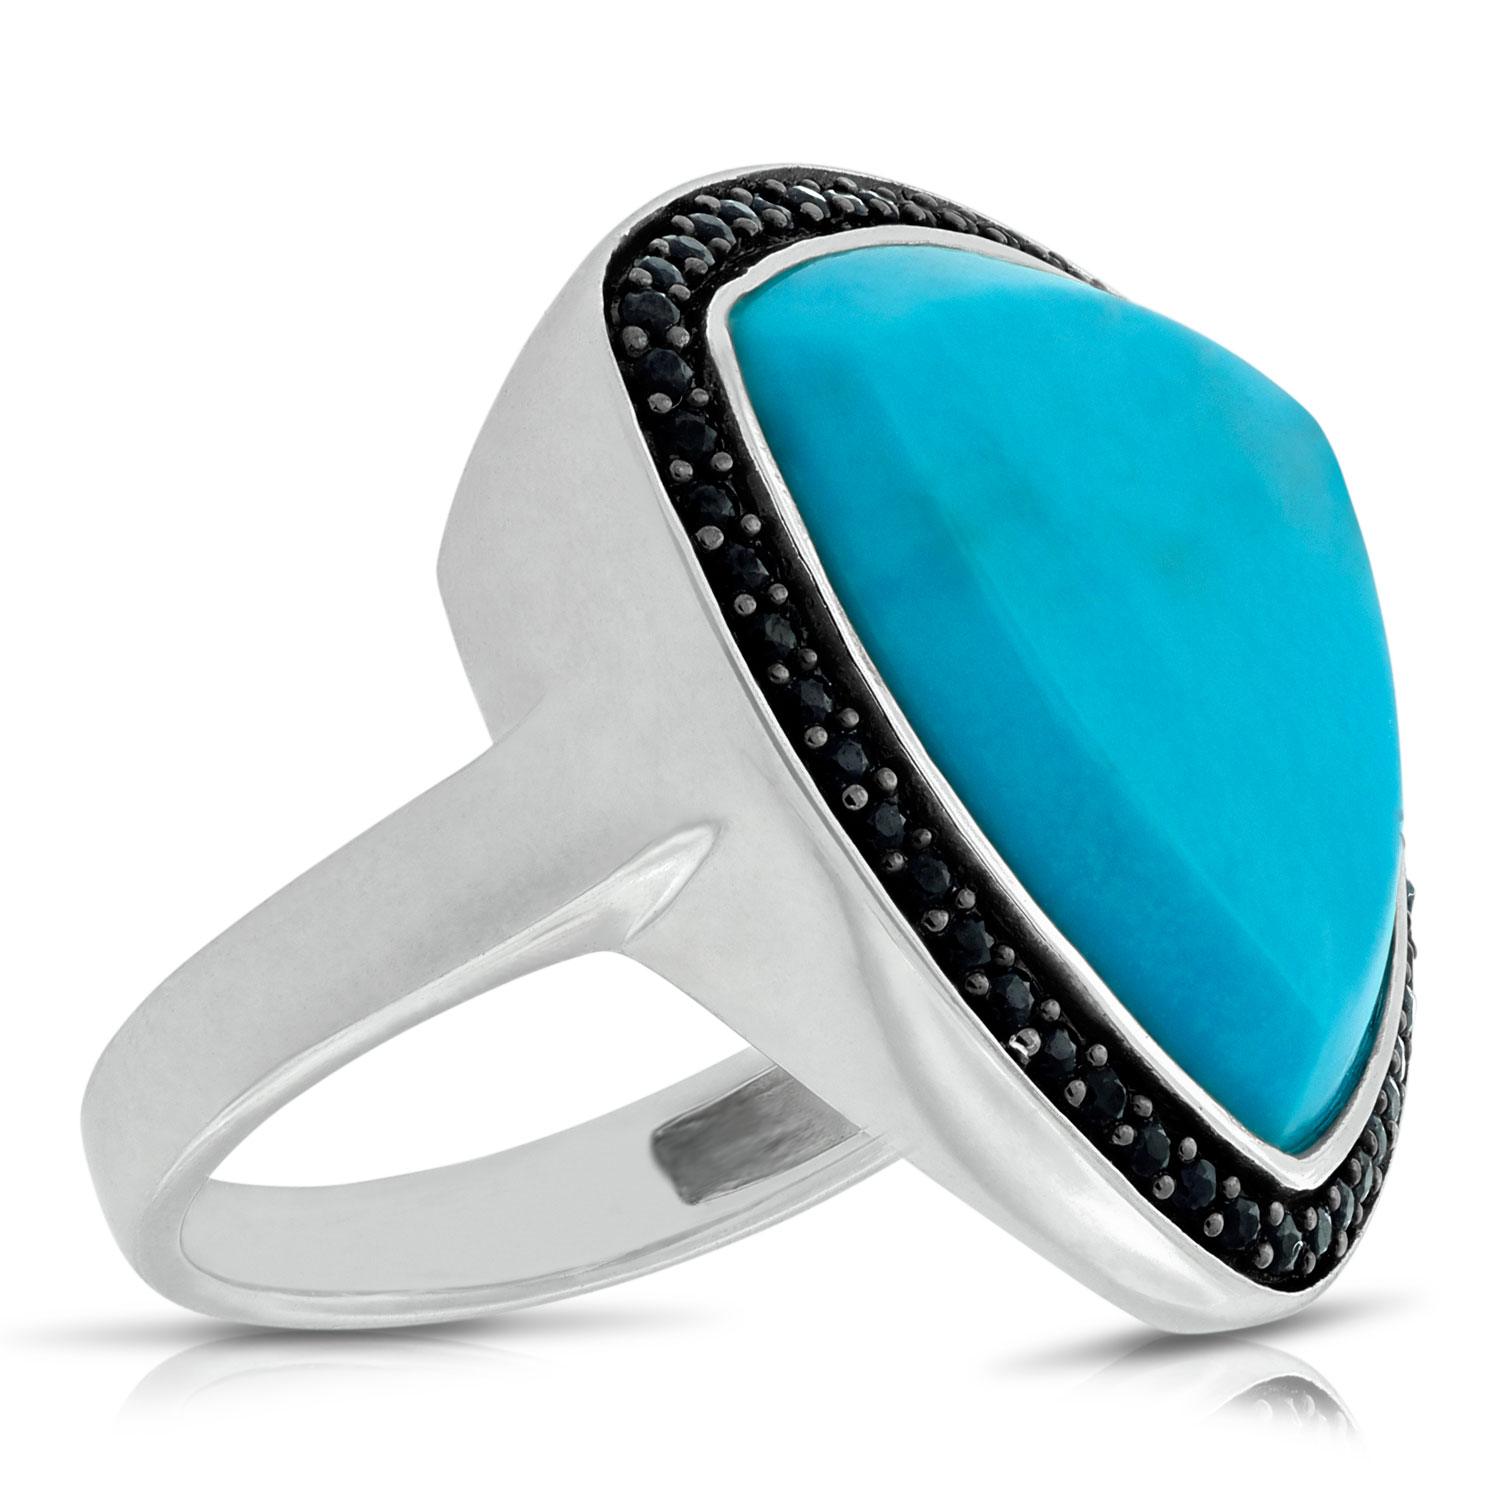 Using Rings such as Gemstone Rings is great for your Adornment